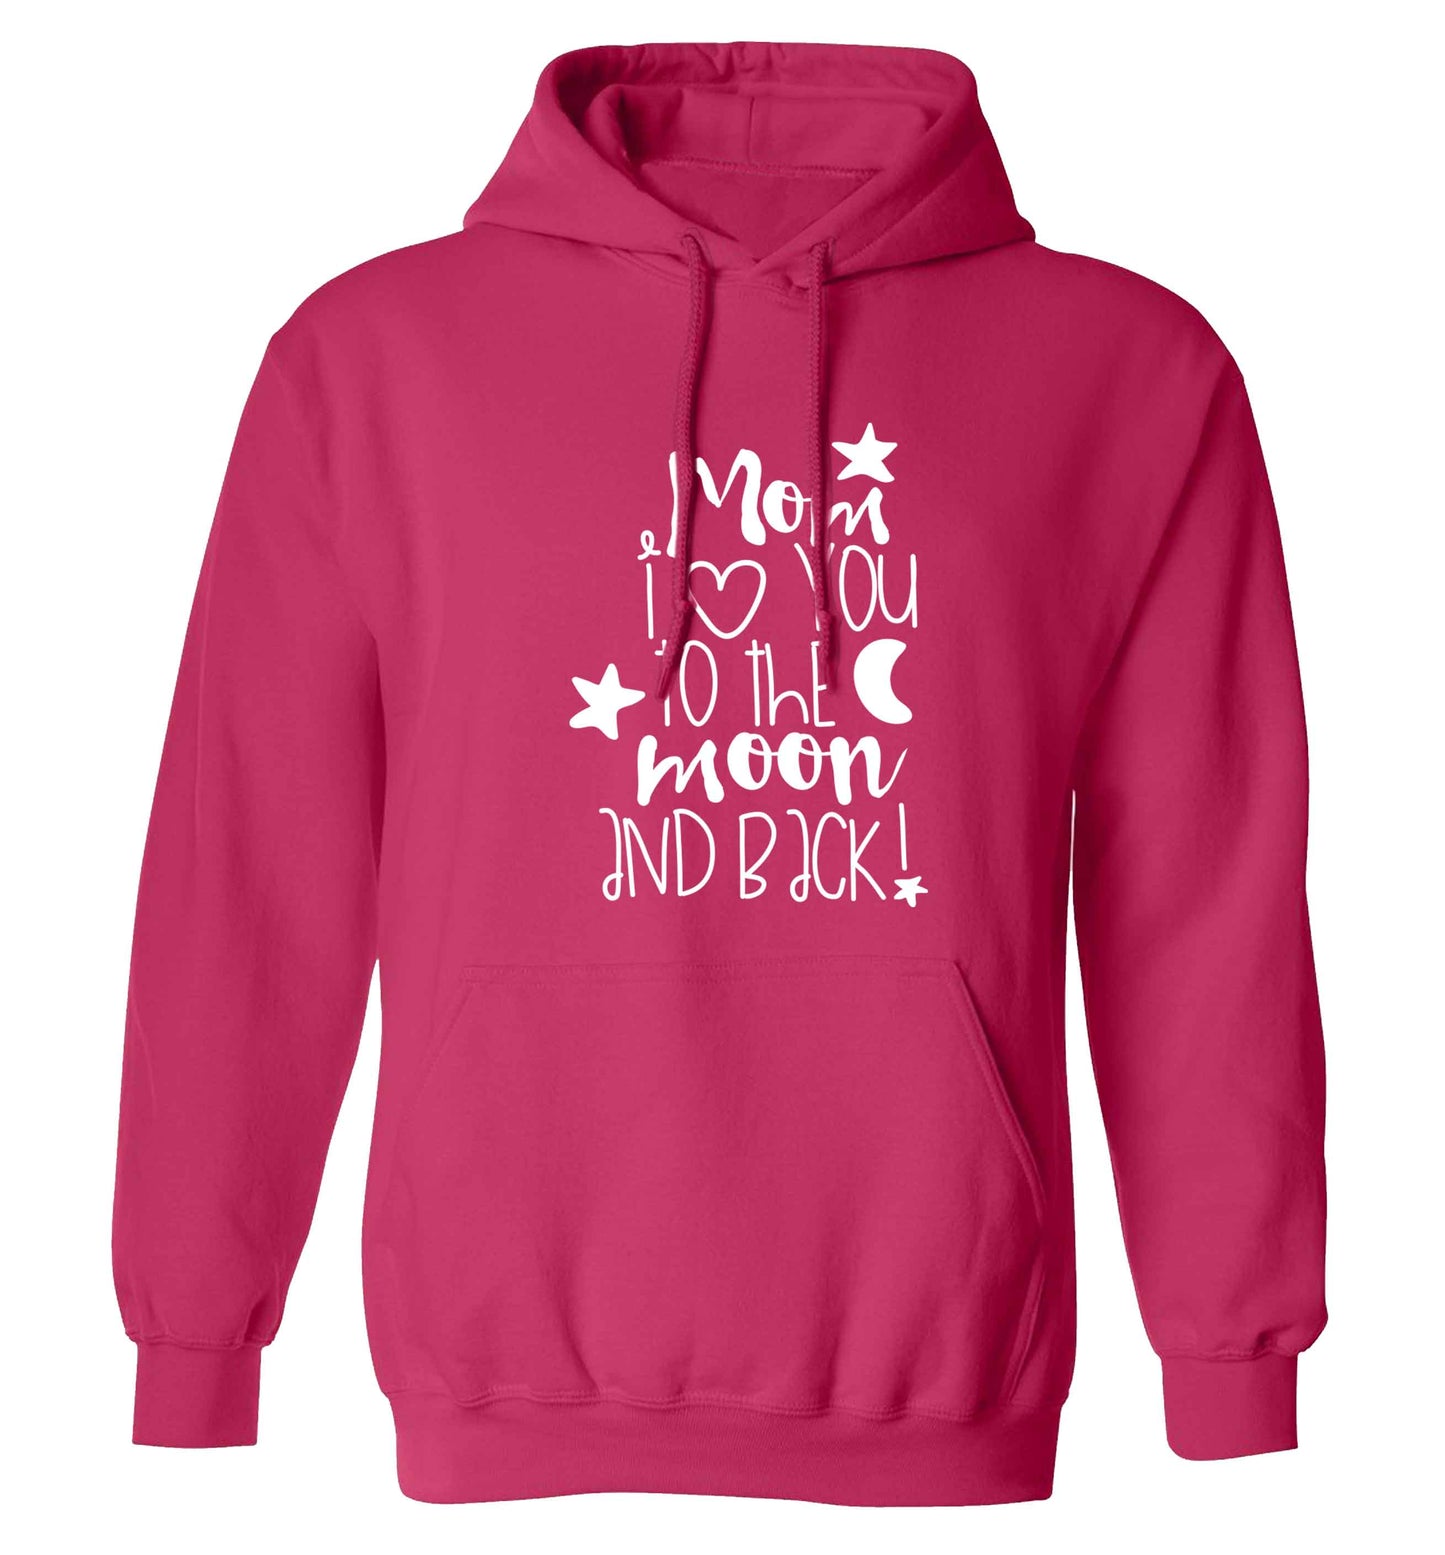 Mom I love you to the moon and back adults unisex pink hoodie 2XL